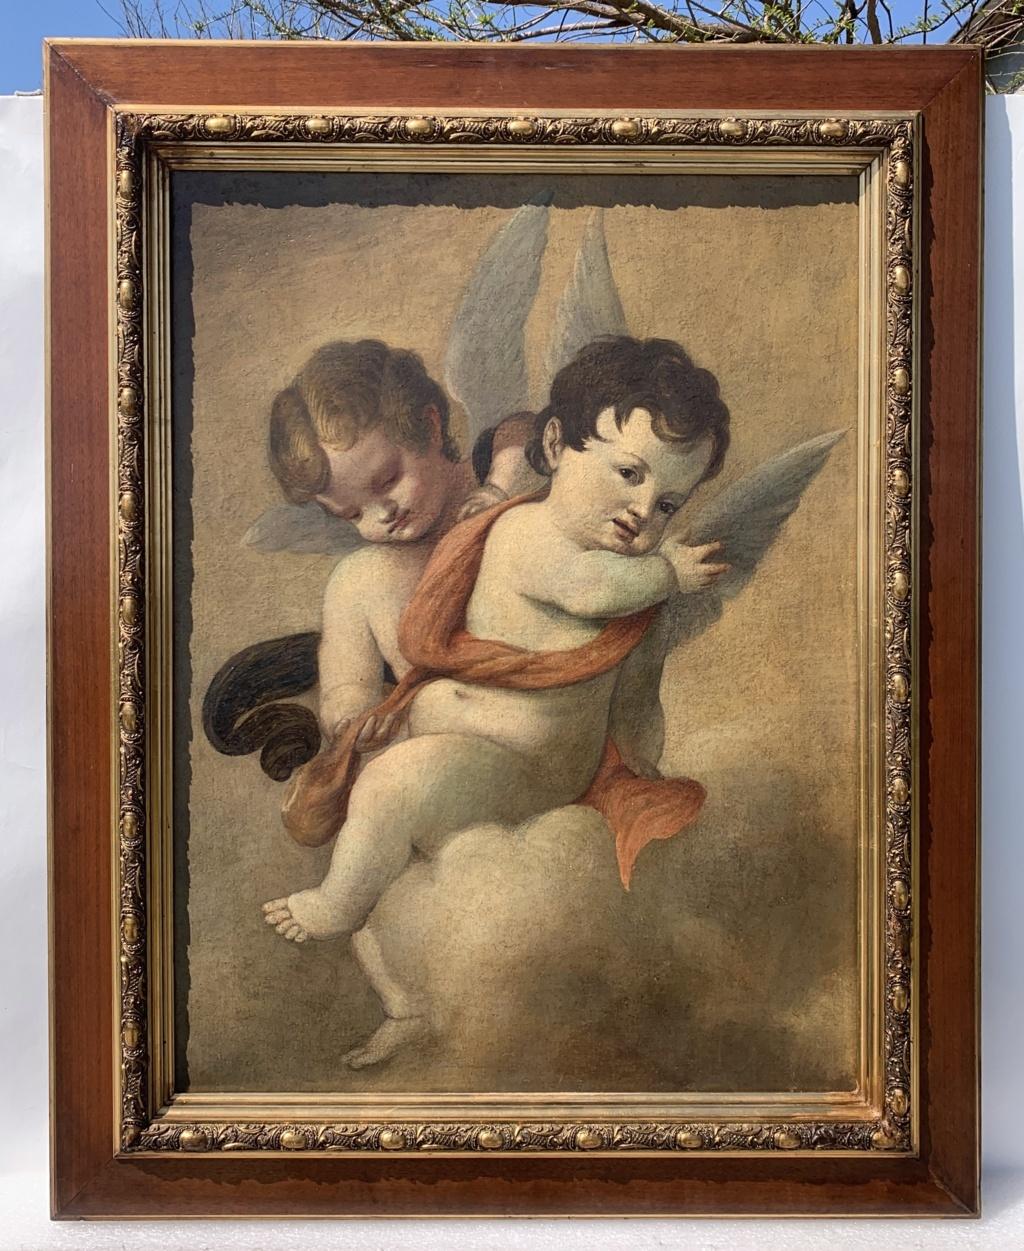 17-18th century Italian figure painting - Putti pair - Oil on canvas Italy - Painting by Unknown